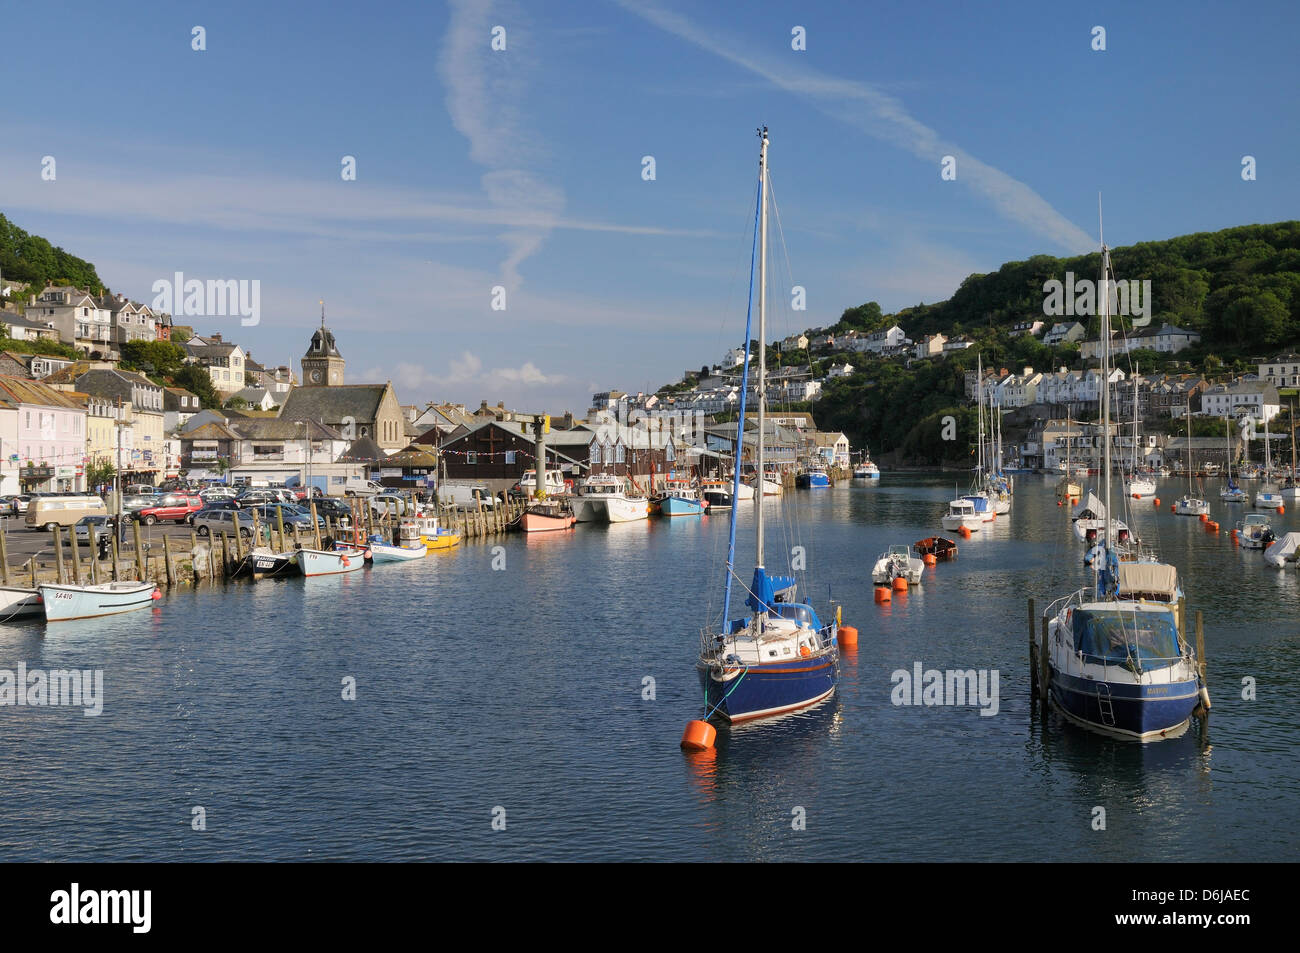 Sailing yachts and fishing boats moored in Looe harbour, Cornwall, England, United Kingdom, Europe Stock Photo